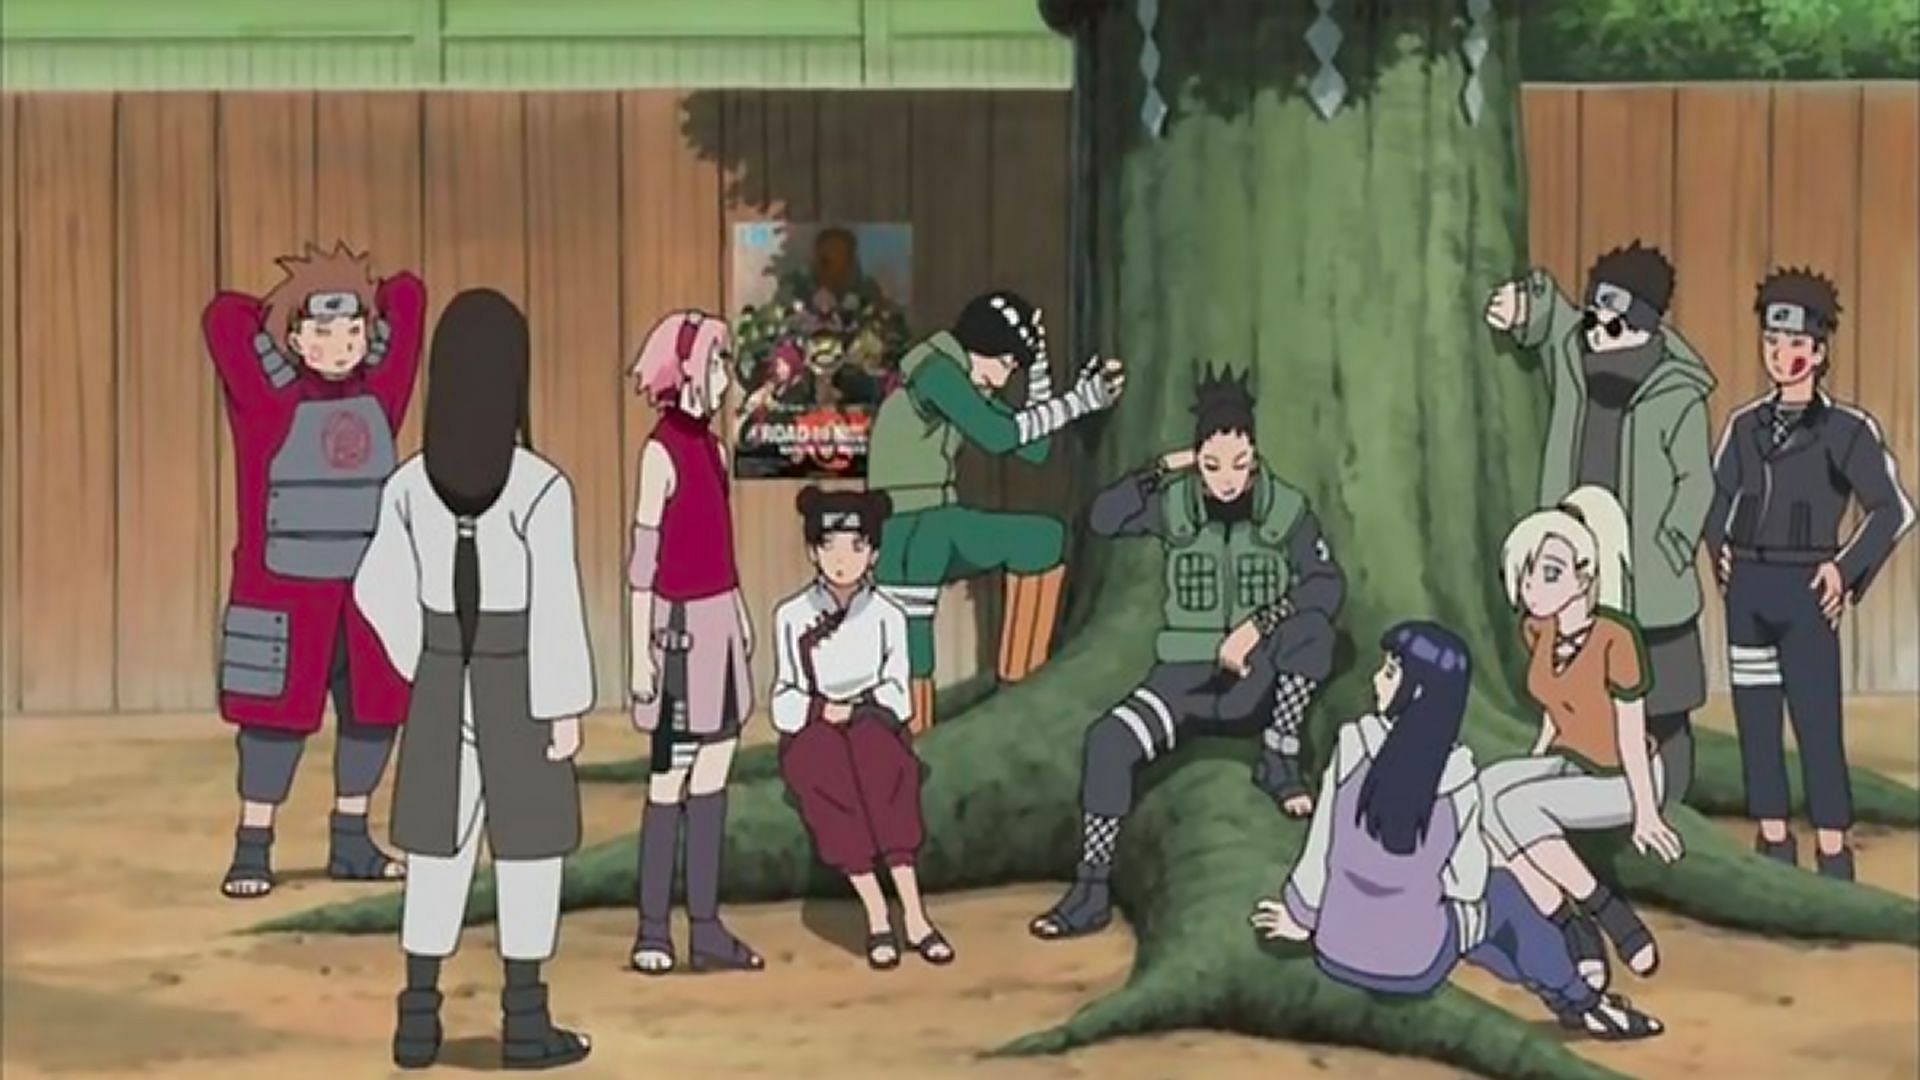 Naruto movie poster in the background (Image via Pierrot)